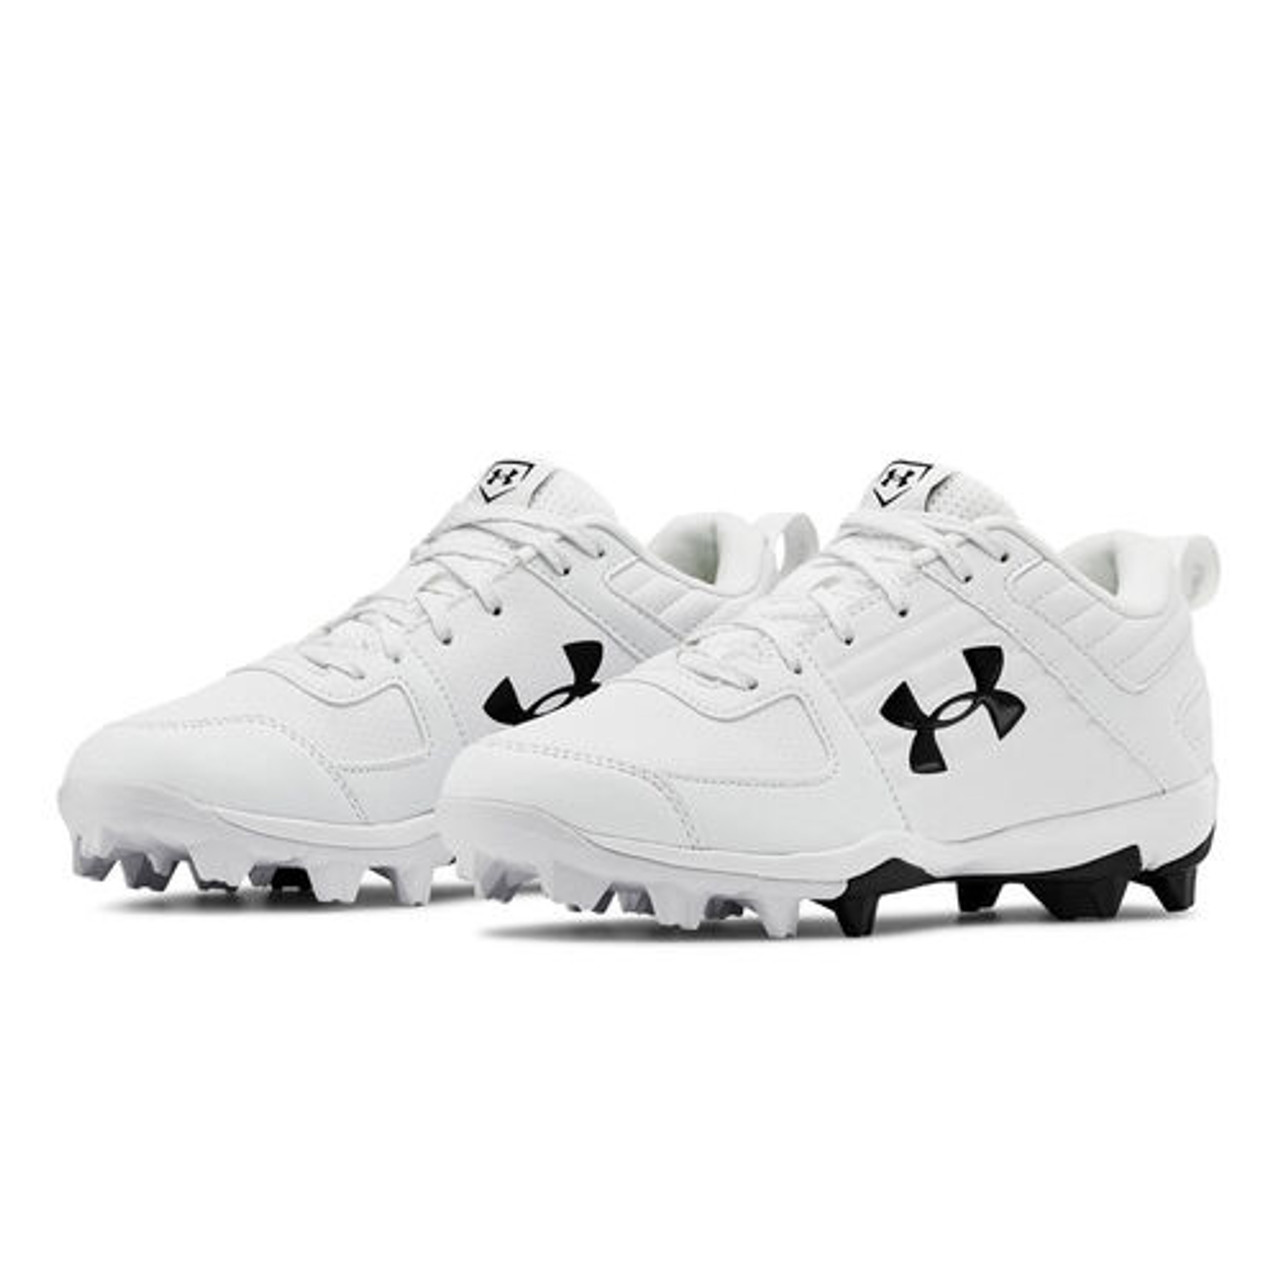 Under Armour Leadoff Low RM Jr. Youth 